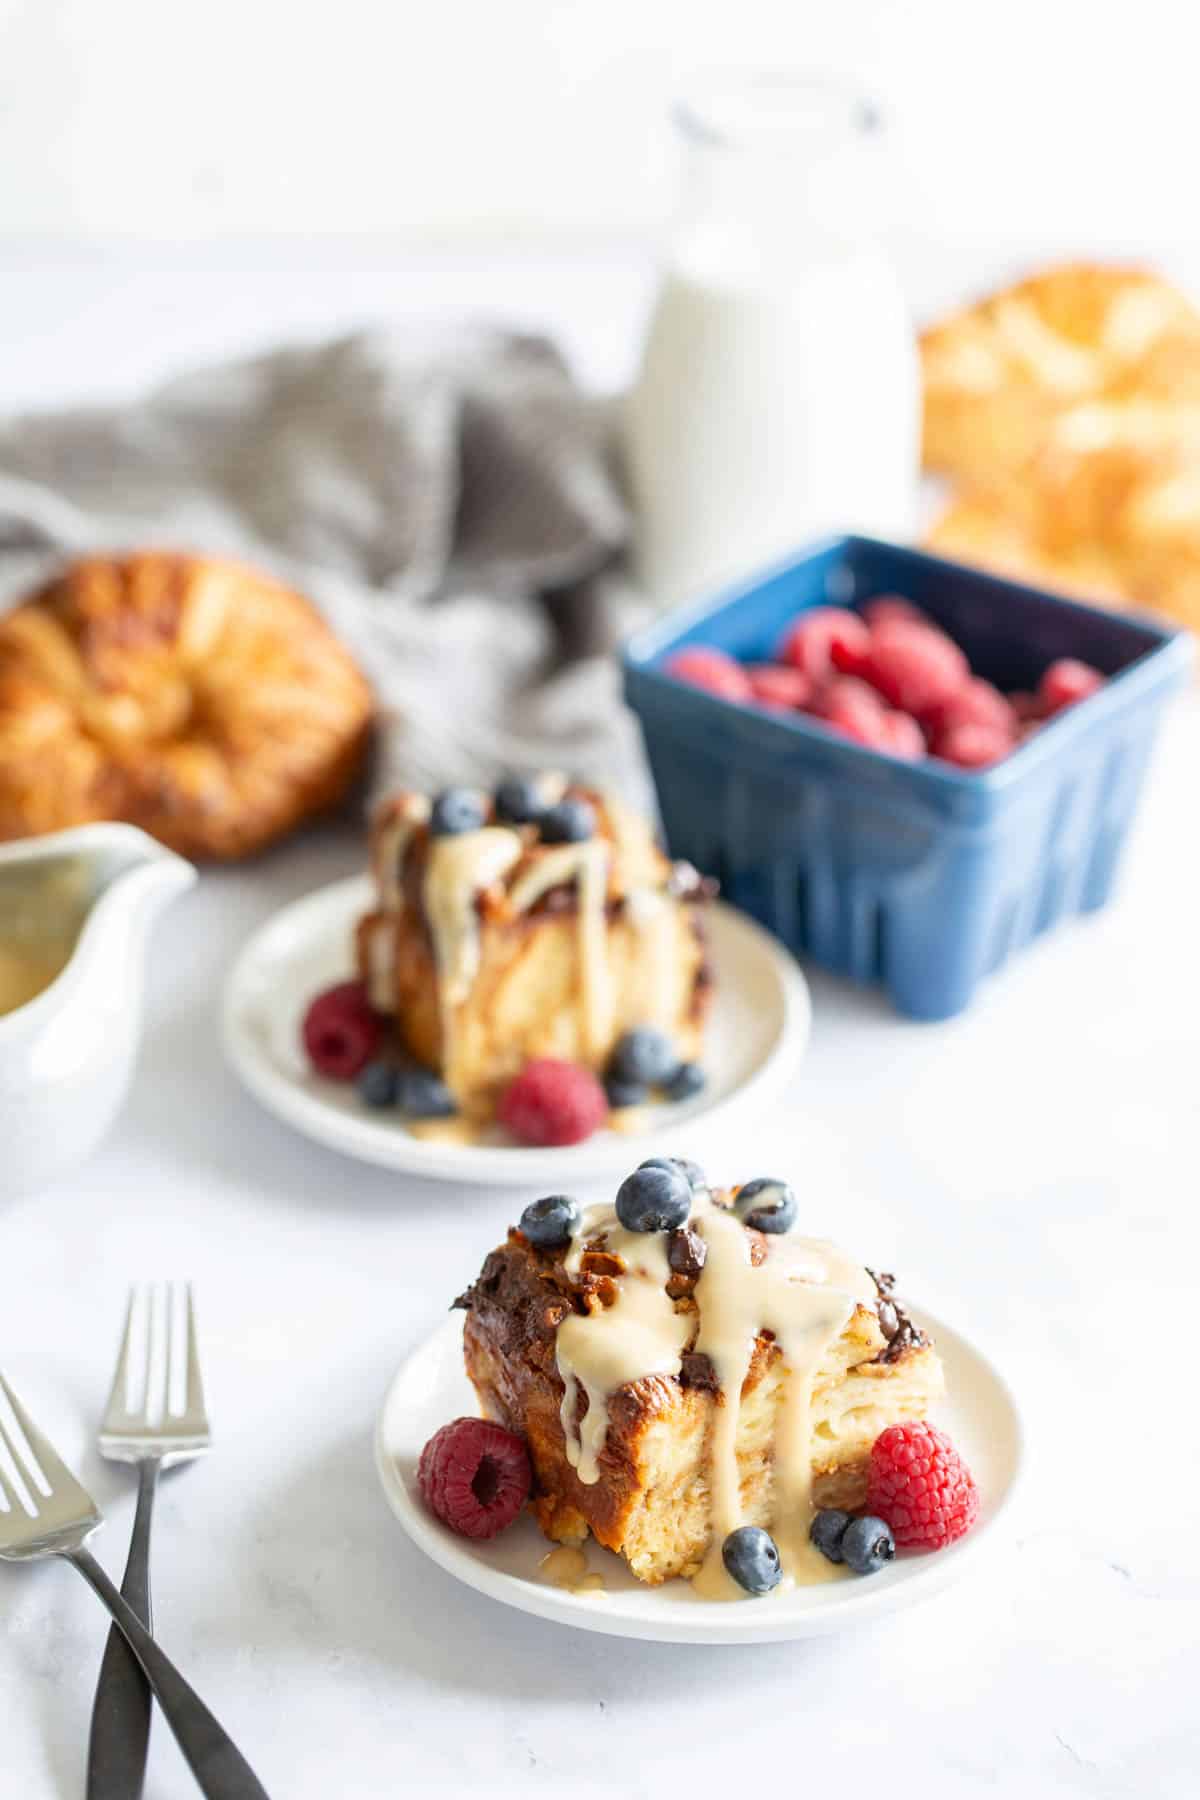 A plate of croissant bread pudding topped with berries and drizzled with syrup, accompanied by a milk bottle and more berries in the background.